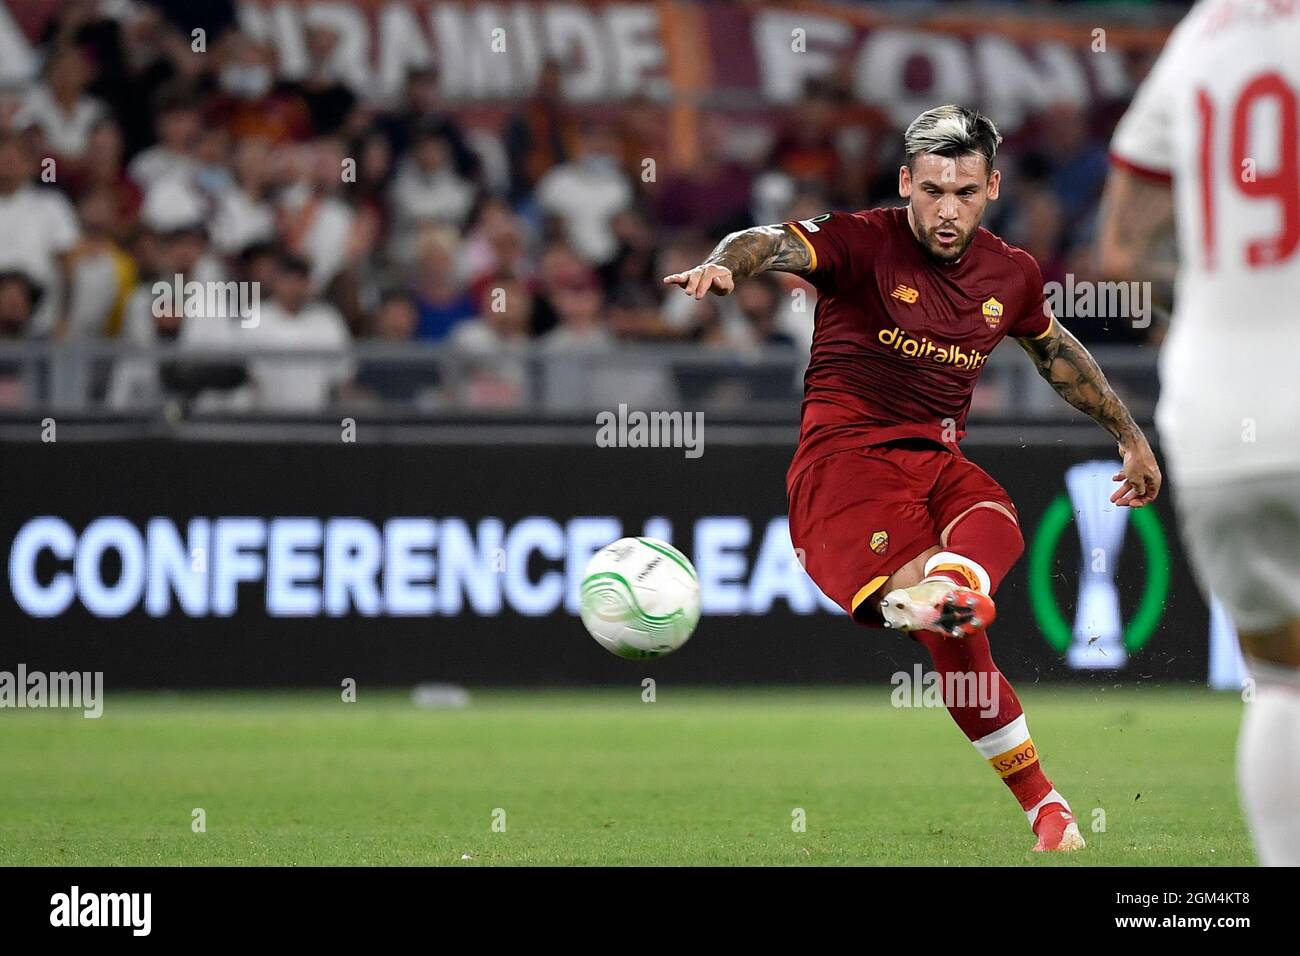 Roma, Italy. 16th Sep, 2021. Carles Perez of AS Roma in action during the Conference league group C football match between AS Roma and PFC CSKA Sofia at Olimpico stadium in Rome (Italy), September 16th, 2021. Photo Antonietta Baldassarre/Insidefoto Credit: insidefoto srl/Alamy Live News Stock Photo